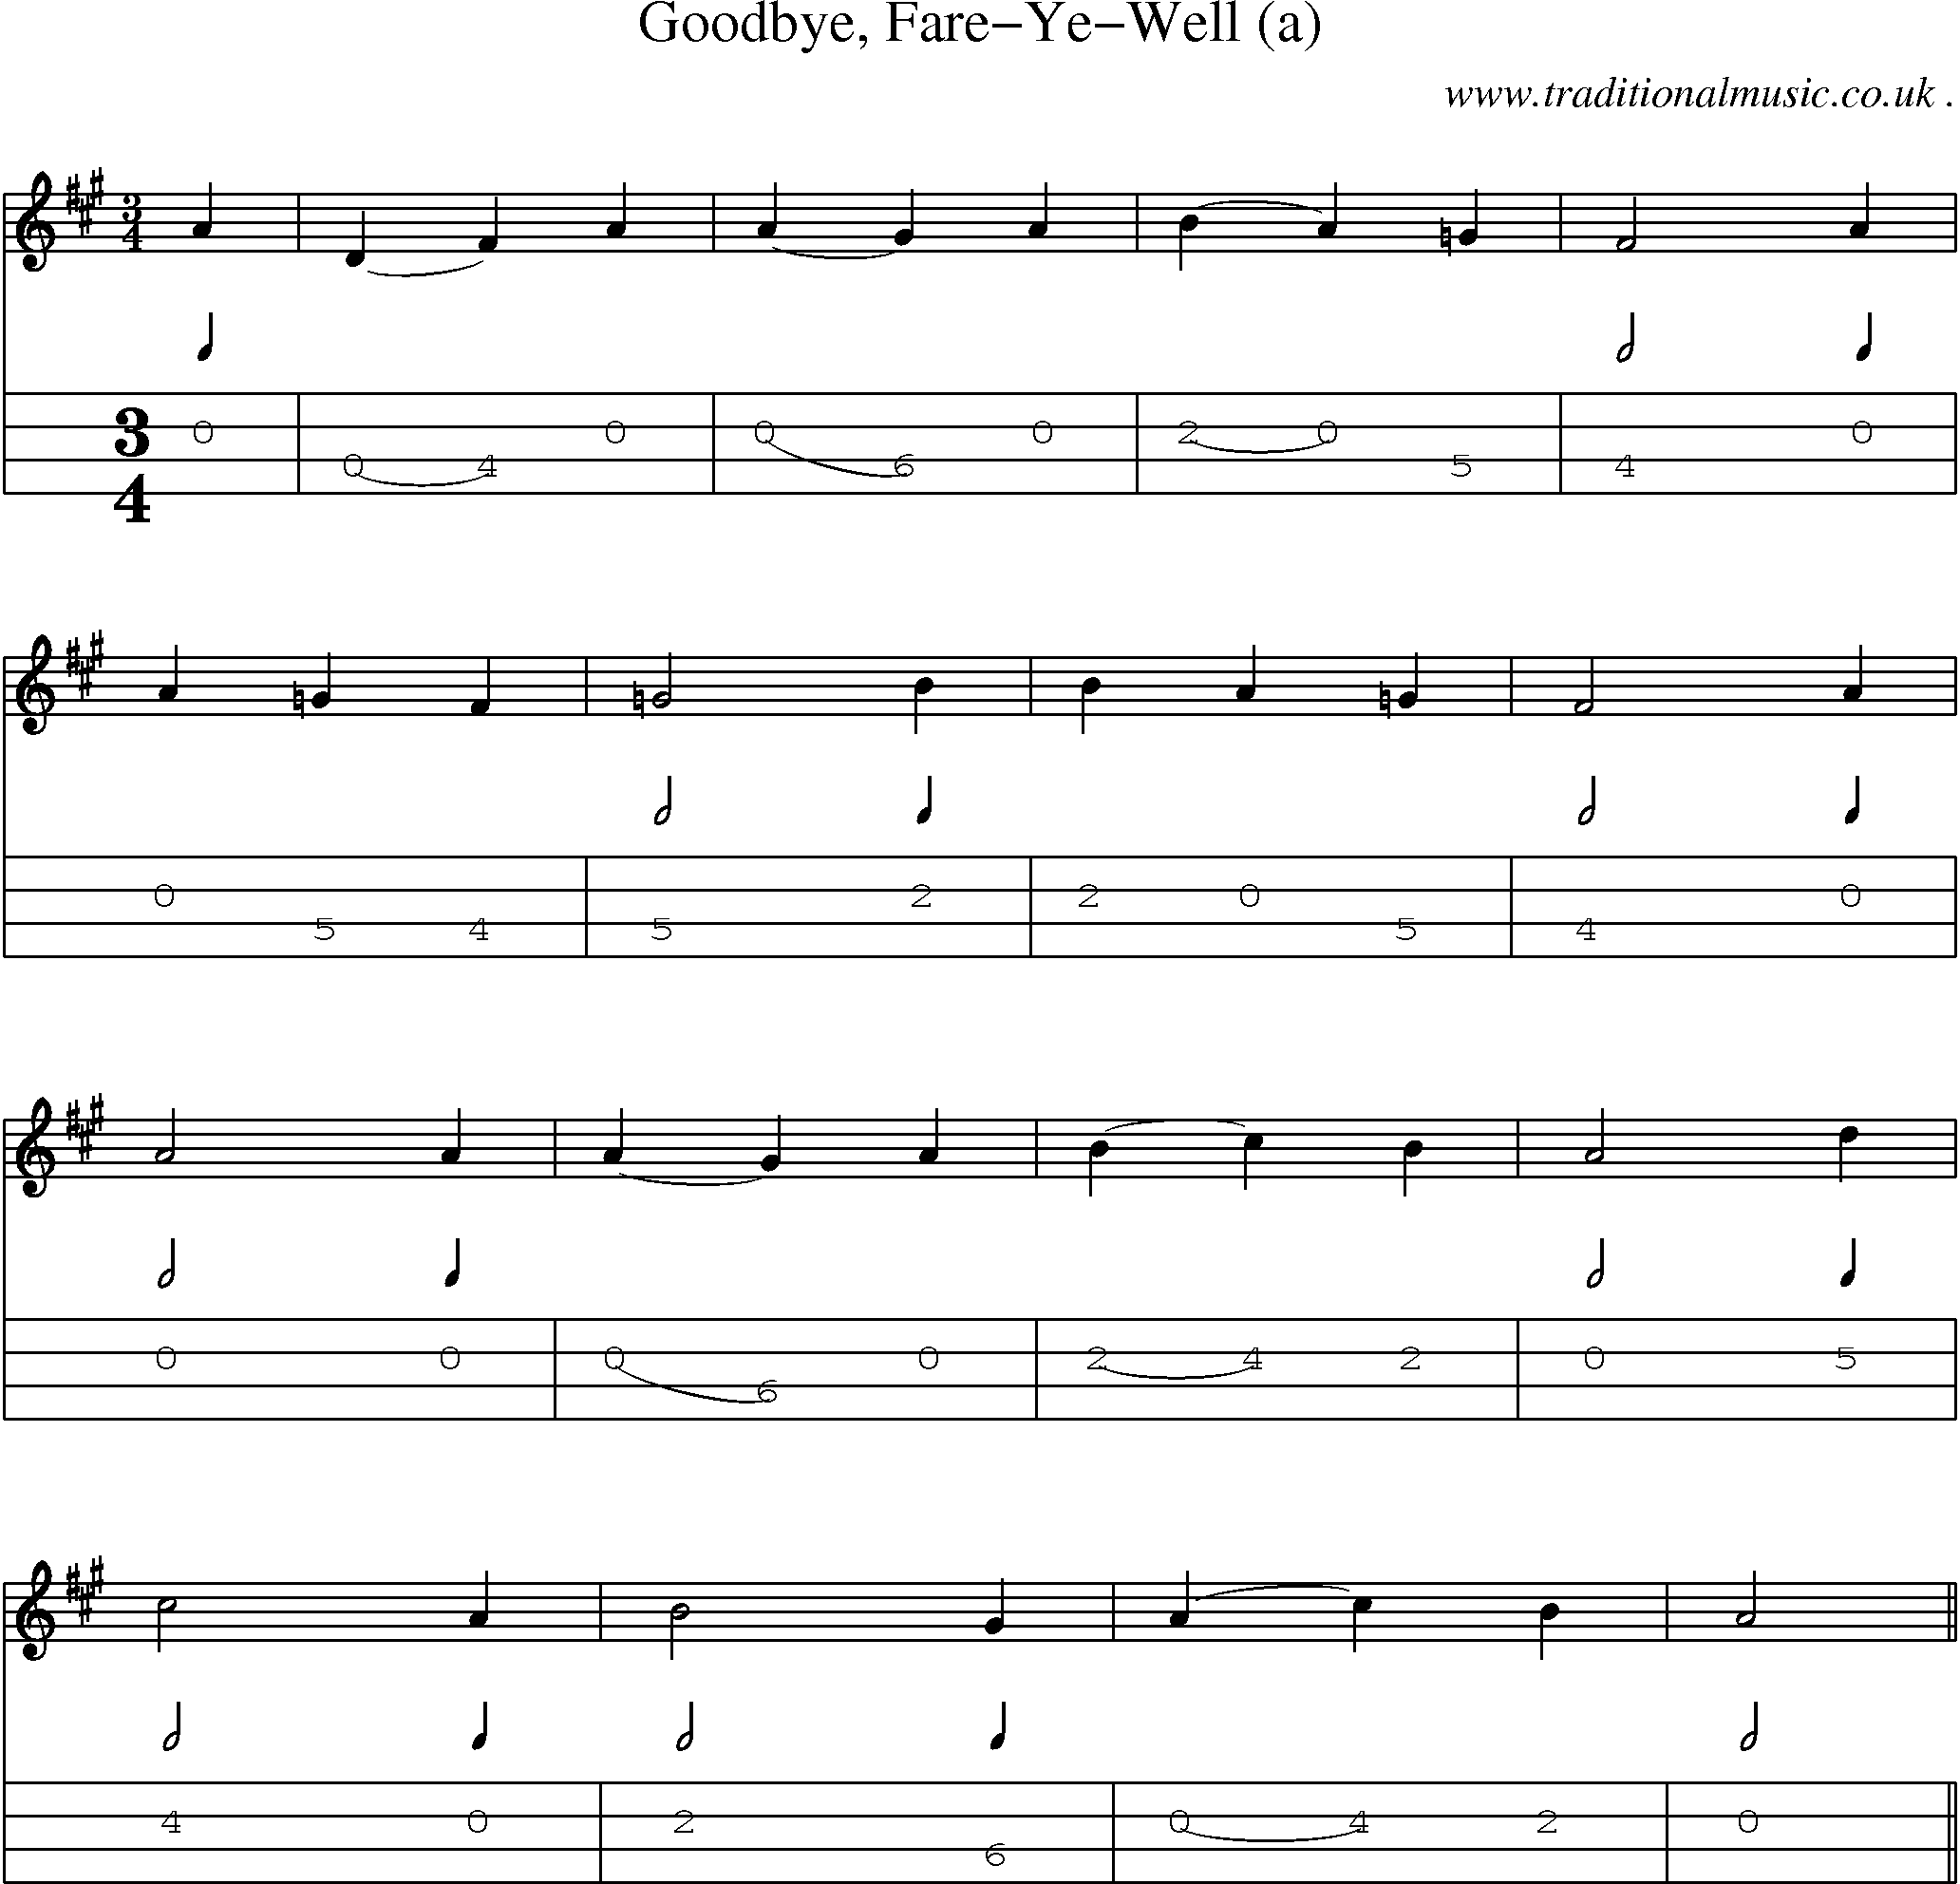 Sheet-Music and Mandolin Tabs for Goodbye Fare-ye-well (a)